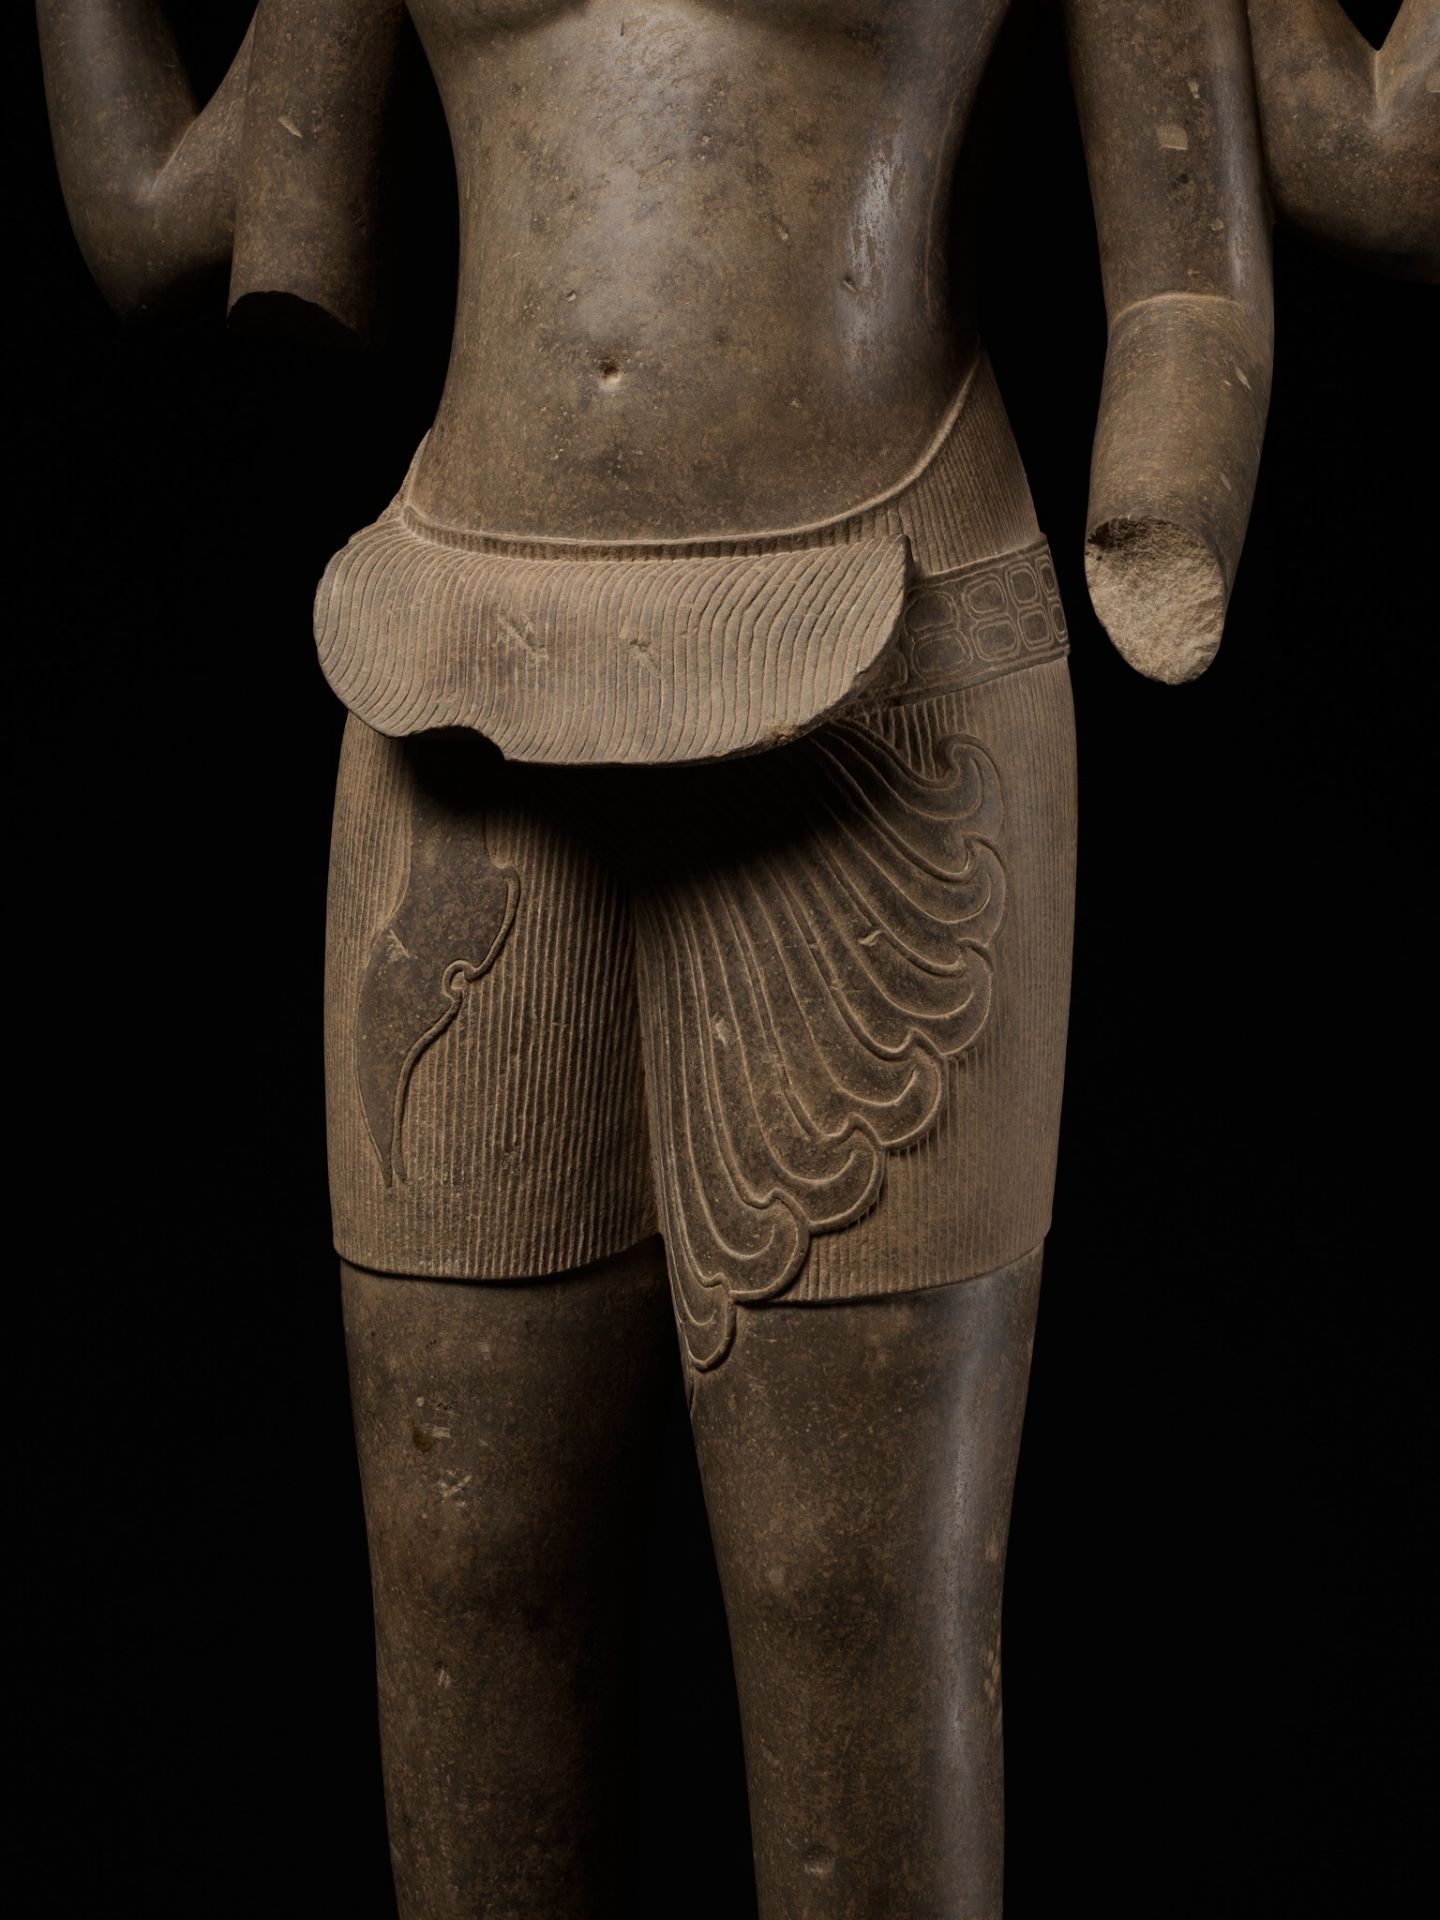 AN EXTREMELY RARE AND MONUMENTAL SANDSTONE STATUE OF VISHNU, ANGKOR PERIOD - Image 6 of 17